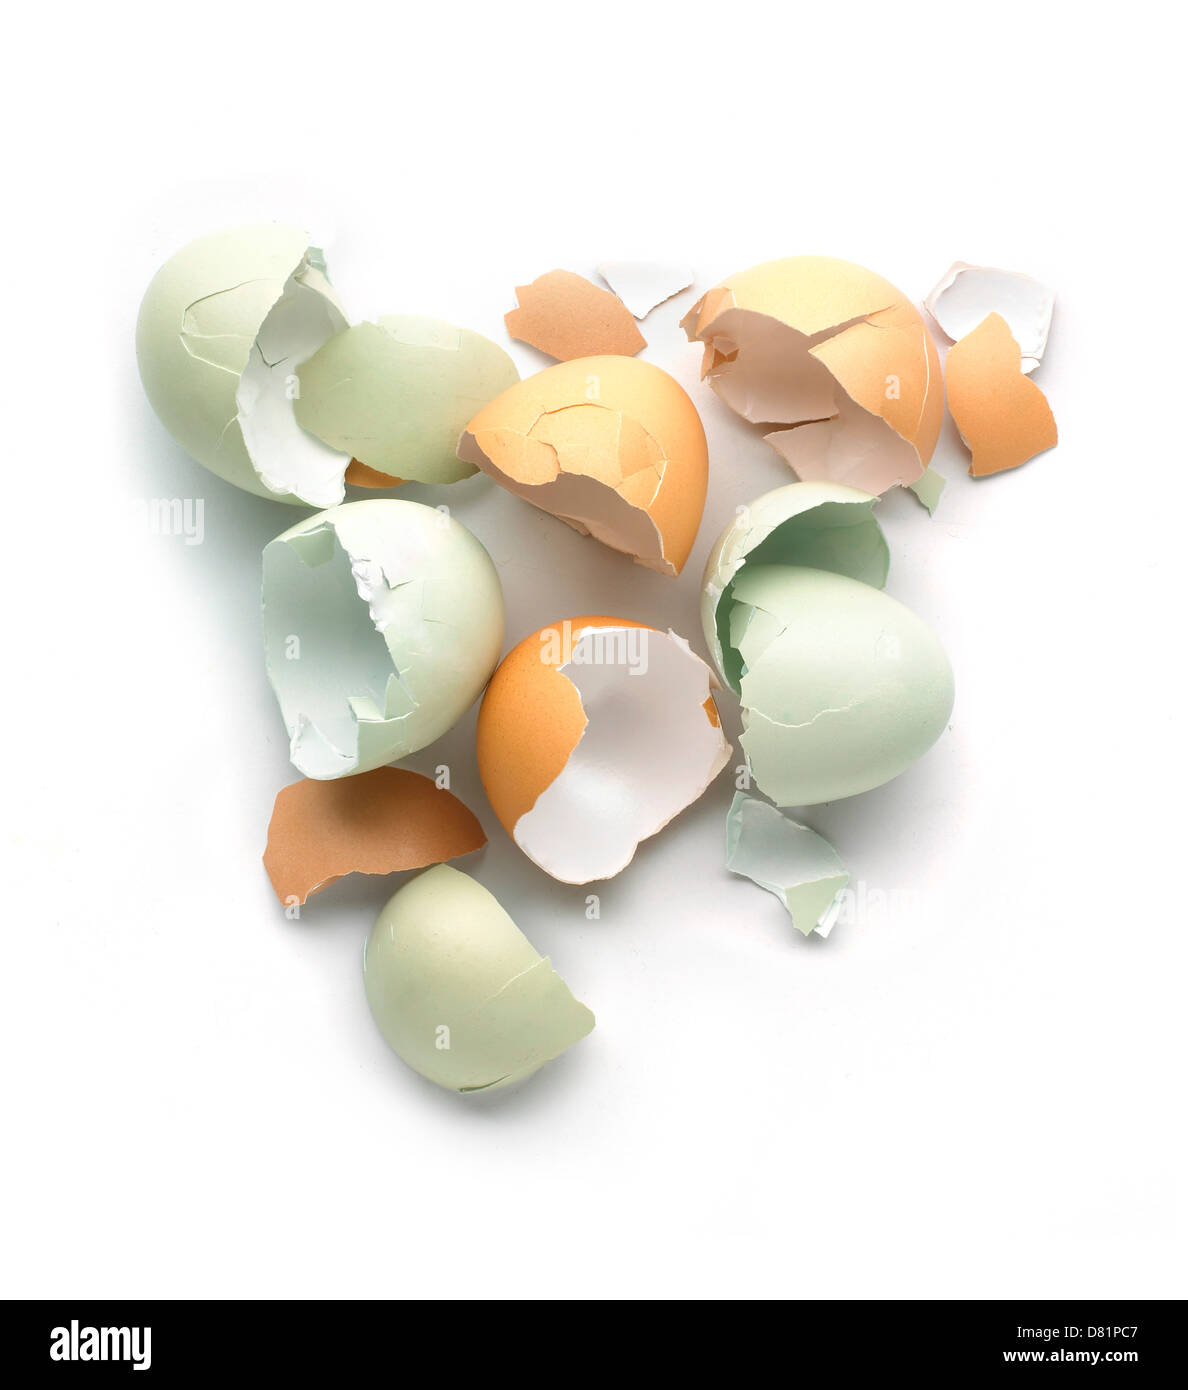 Pile of broken eggshells cut out onto a white background Stock Photo